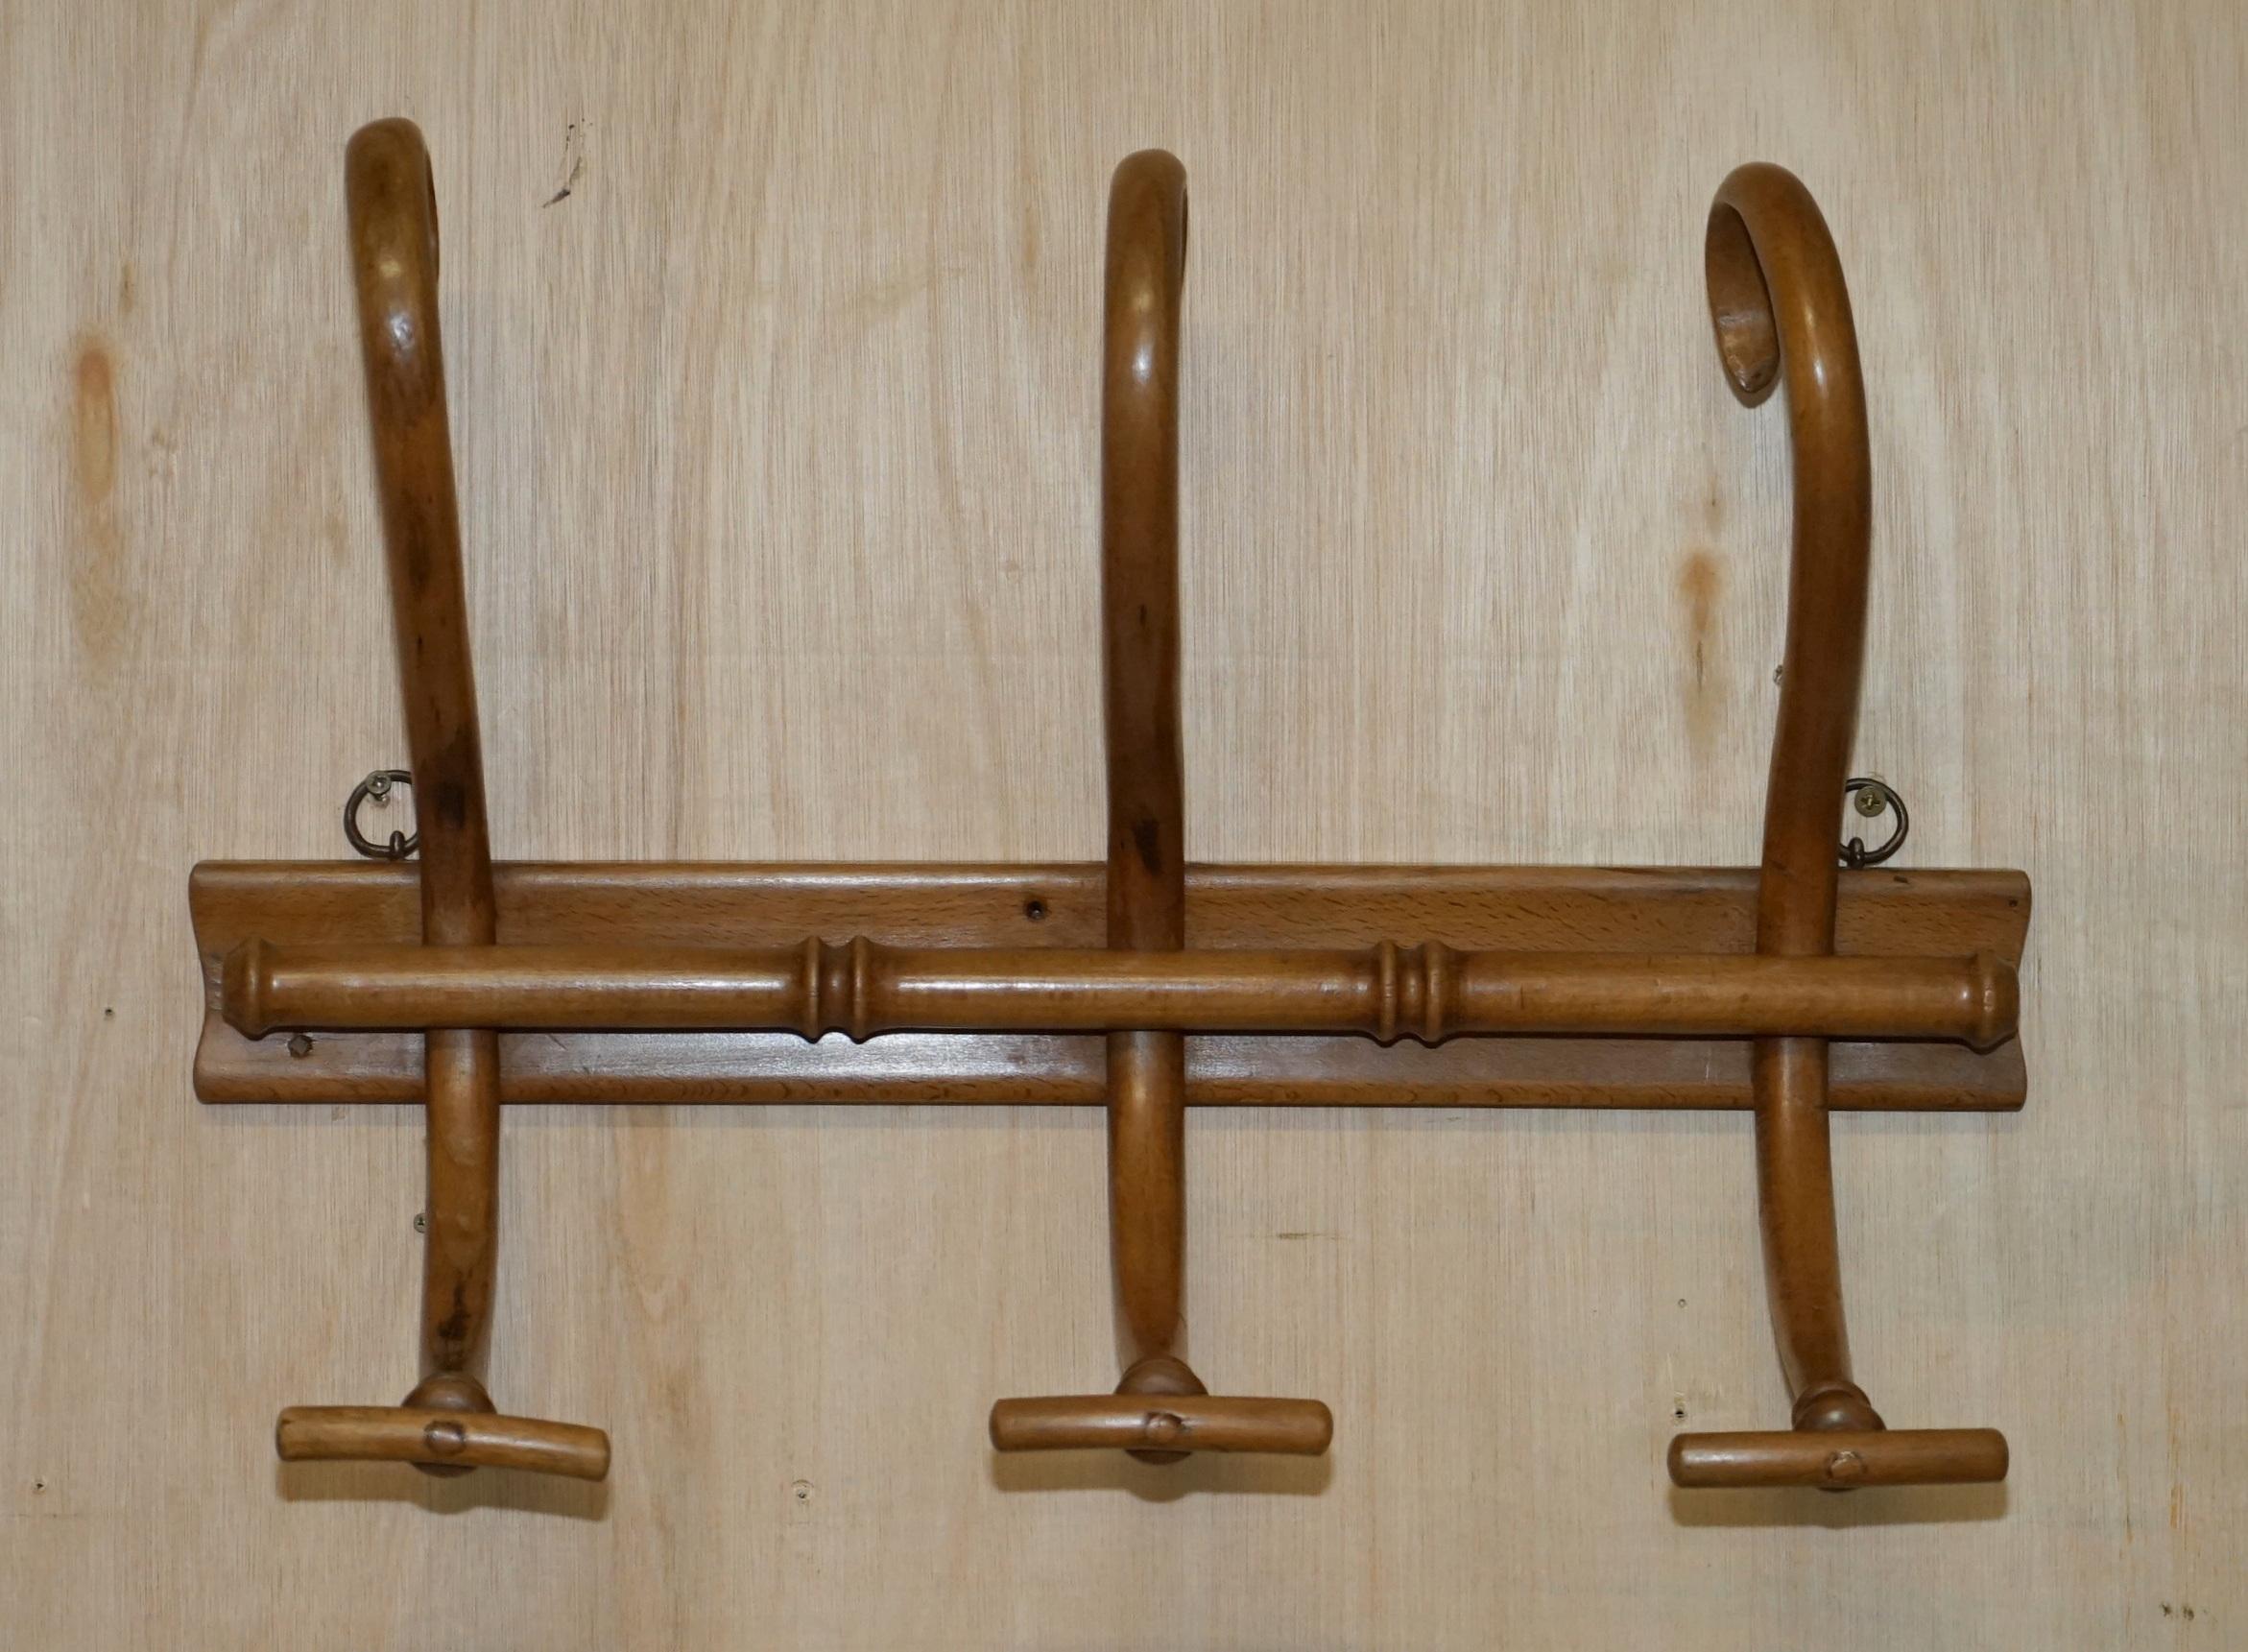 We are is delighted to offer for sale this stunning antique circa 1900’s Thonet Bentwood wall mounted coat rack

A truly stunning piece, if you have ever seen this type of coat rack in the form of a wall mounted rack of the floor standing